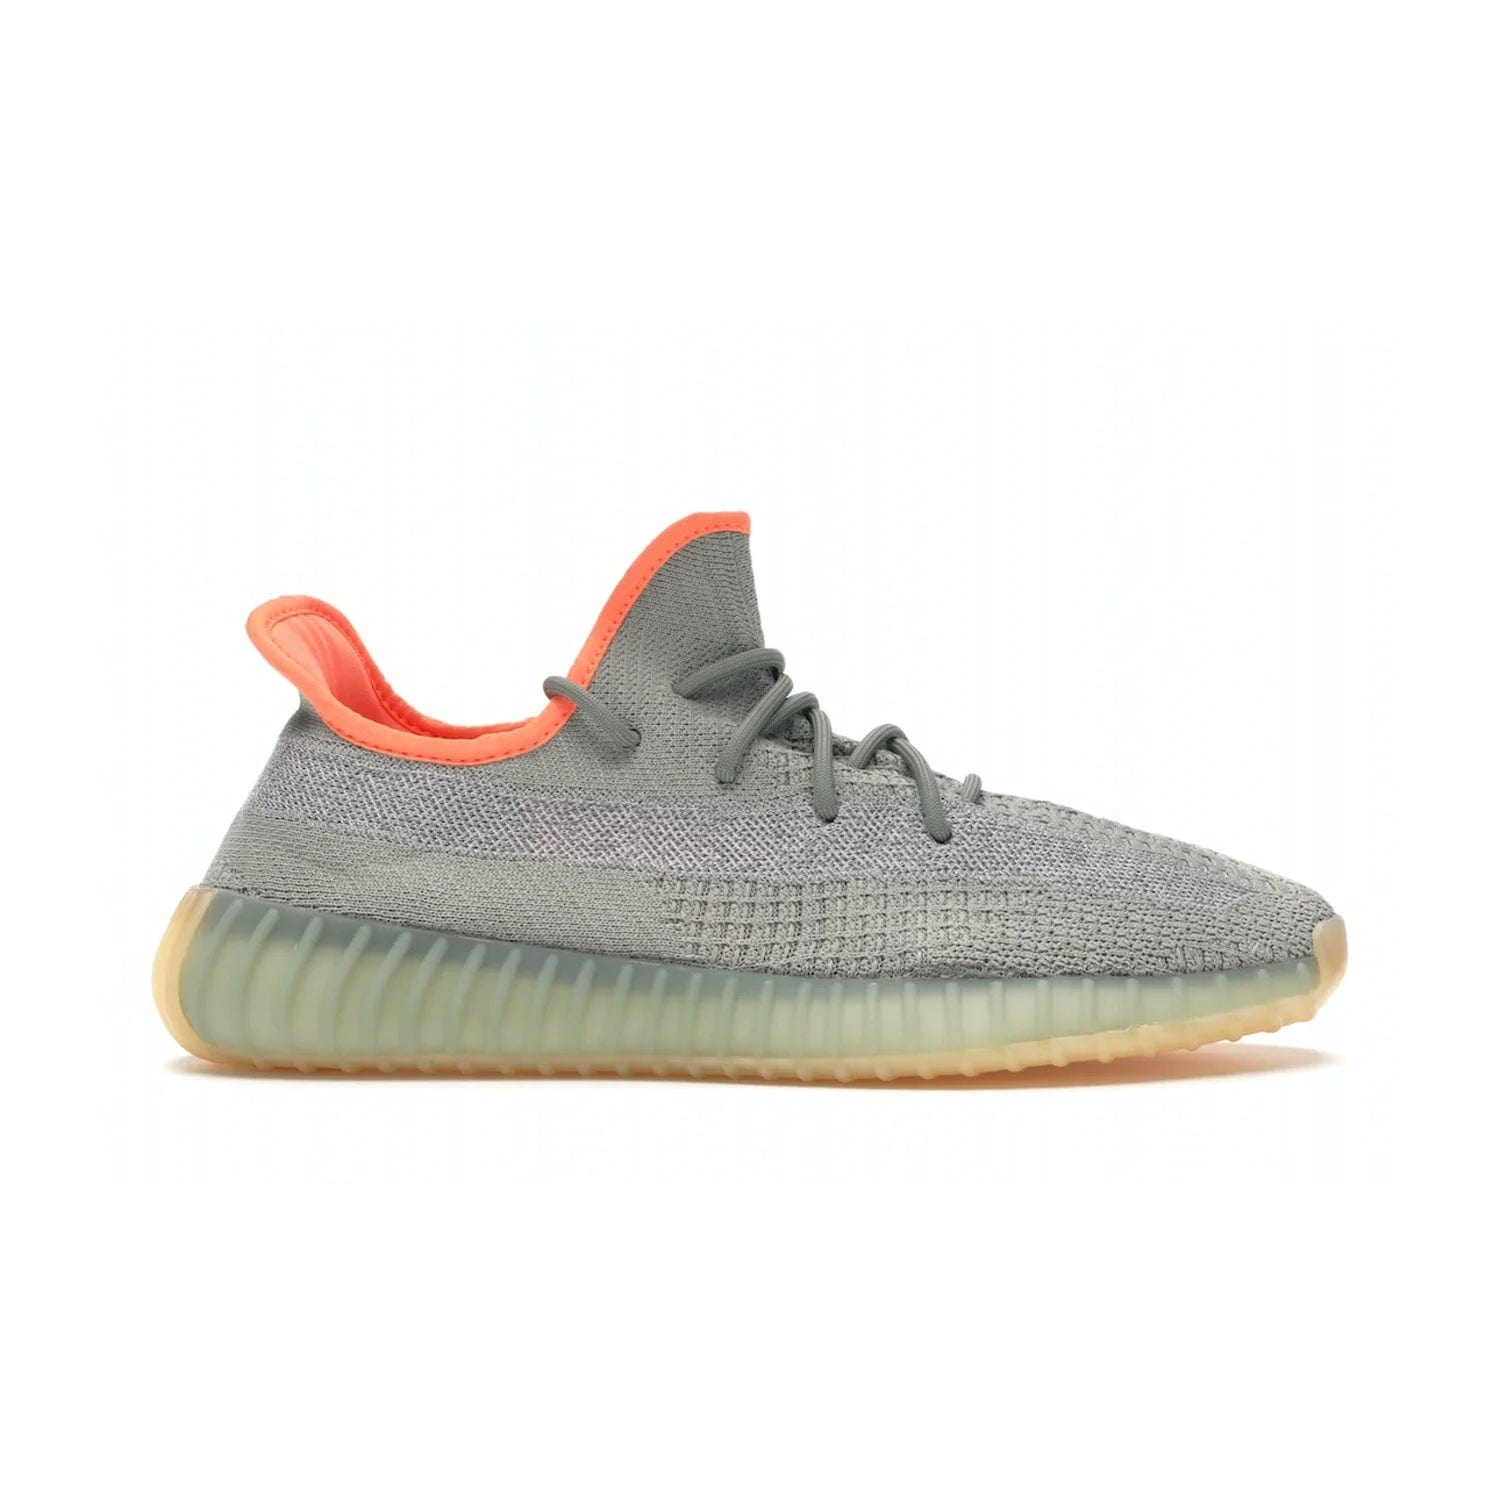 adidas Yeezy Boost 350 V2 Desert Sage - Image 1 - Only at www.BallersClubKickz.com - Upgrade your style with the adidas Yeezy Boost 350 V2 Desert Sage. This 350V2 features a Desert Sage primeknit upper with tonal side stripe, and an orange-highlighted translucent Boost cushioning sole. Stay on-trend in effortless style.